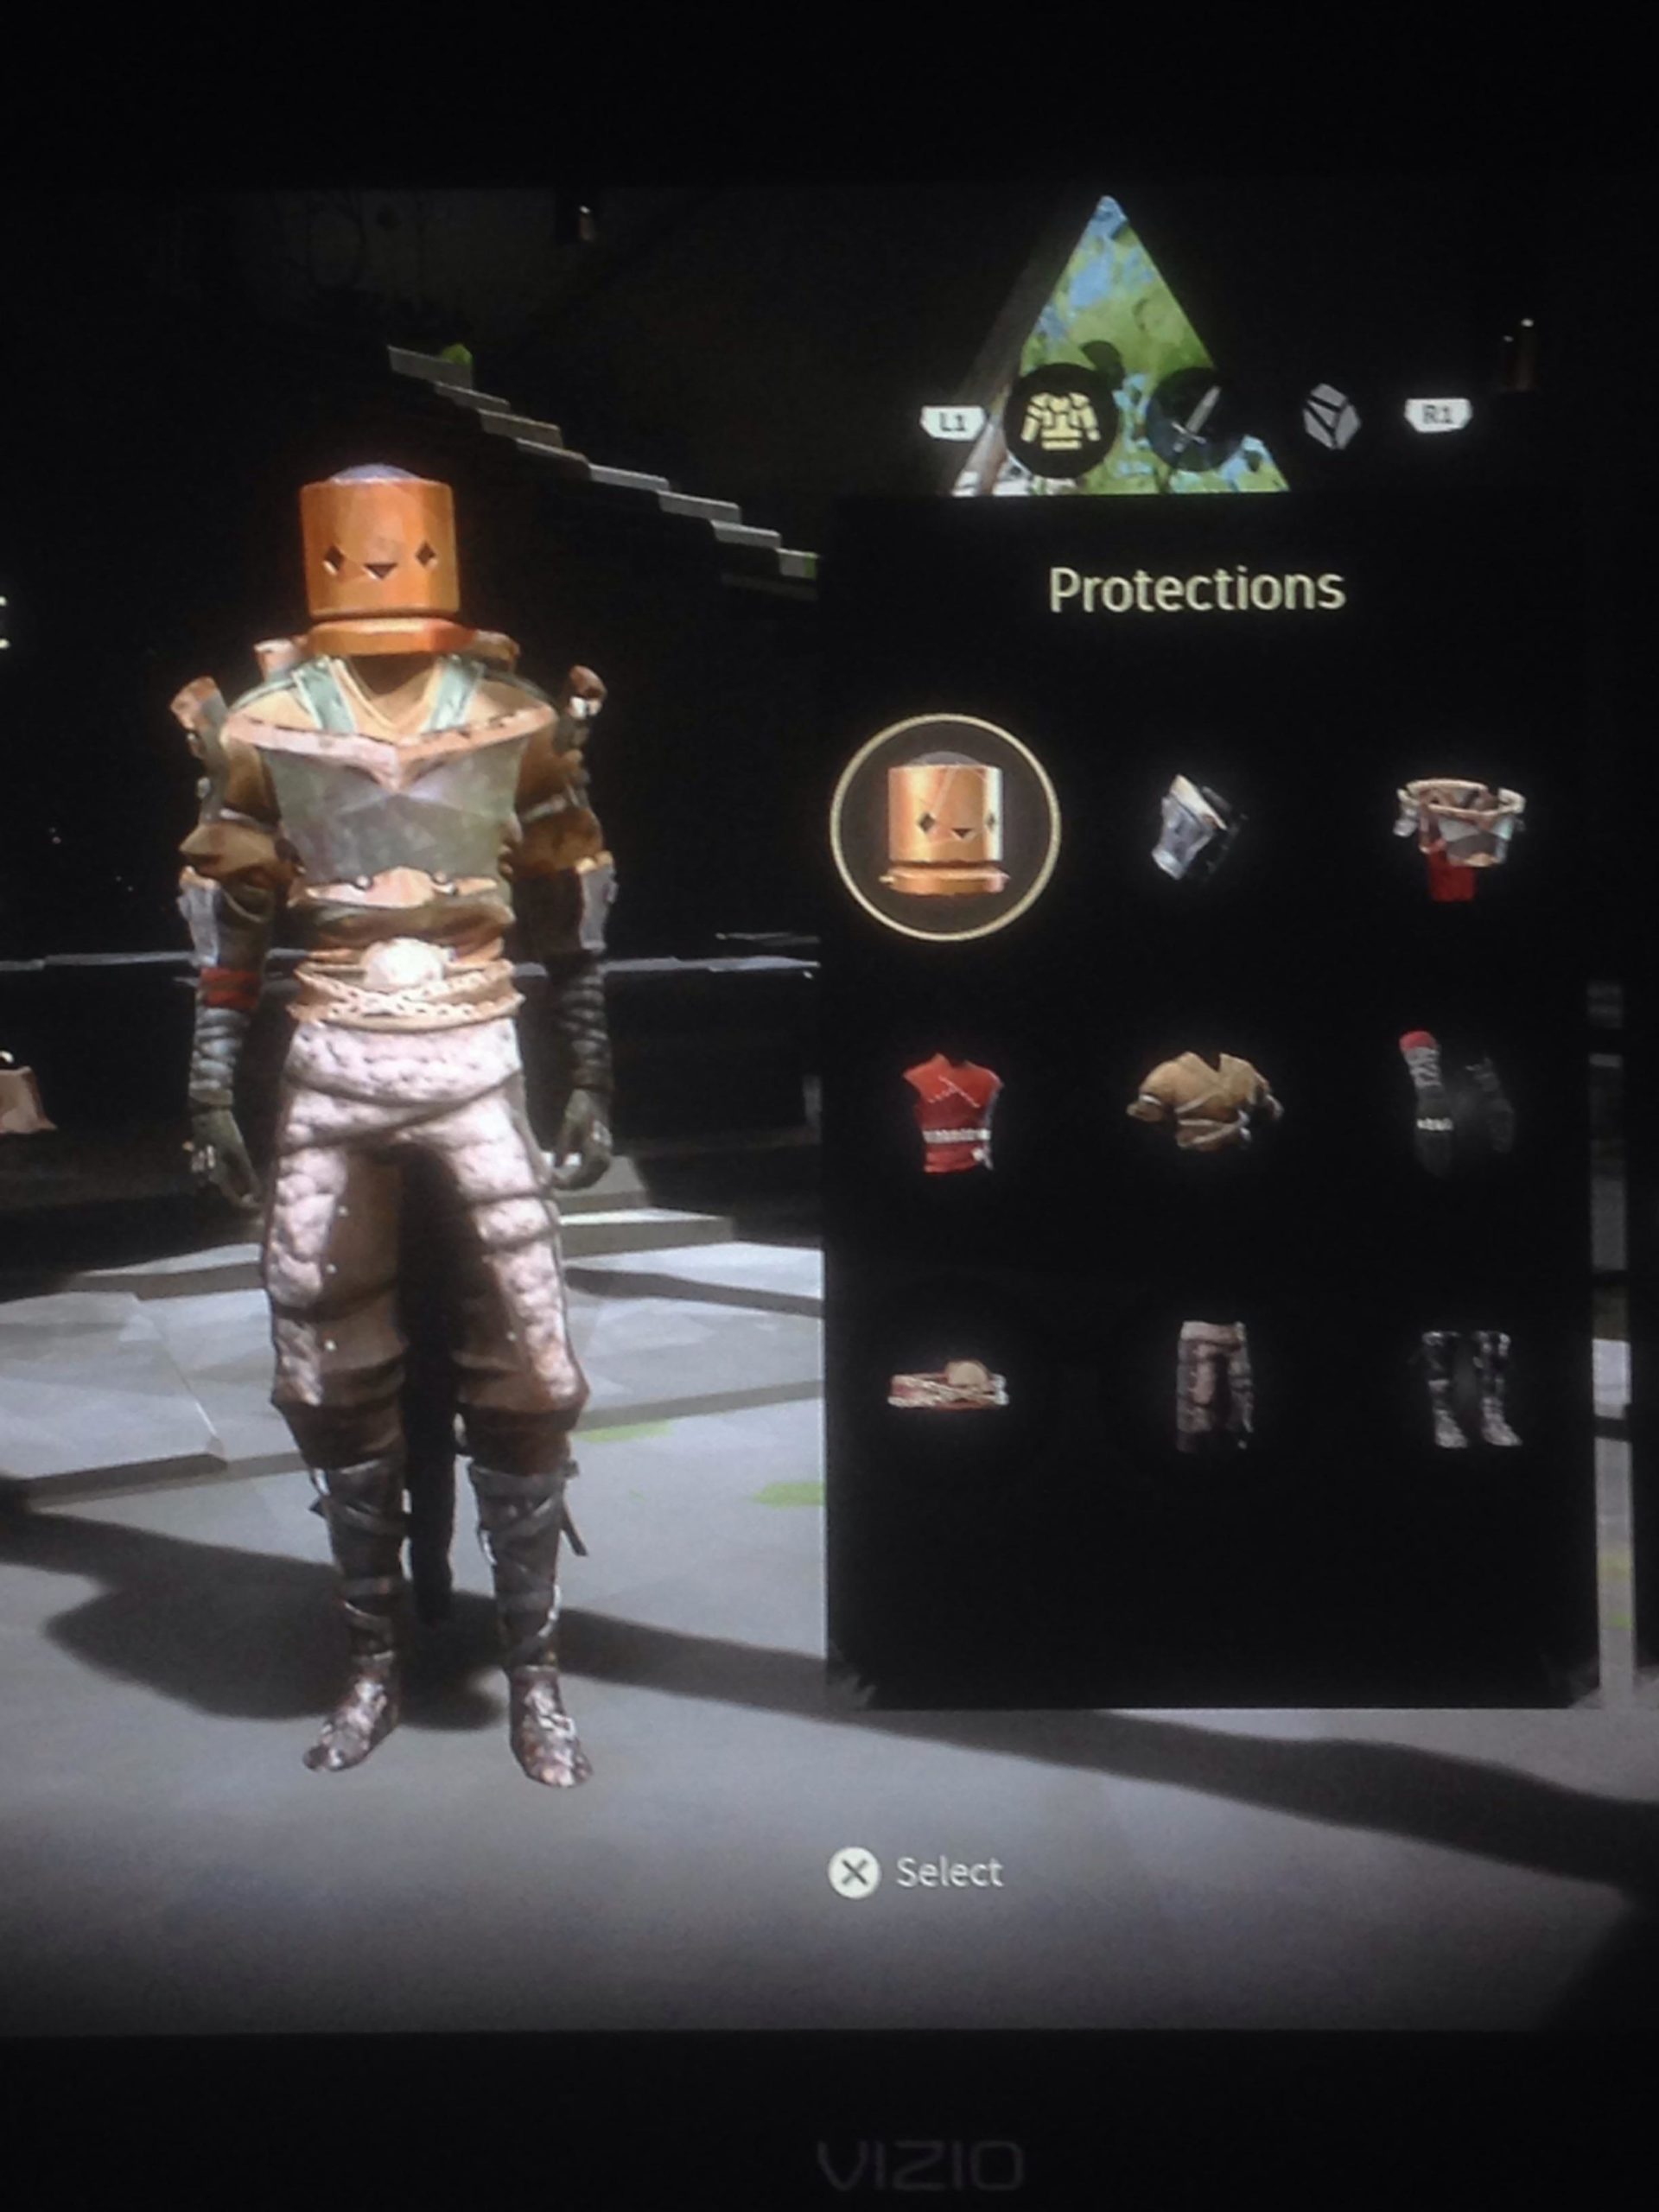 Some Of The Best Looks From Absolver’s Fashion Community